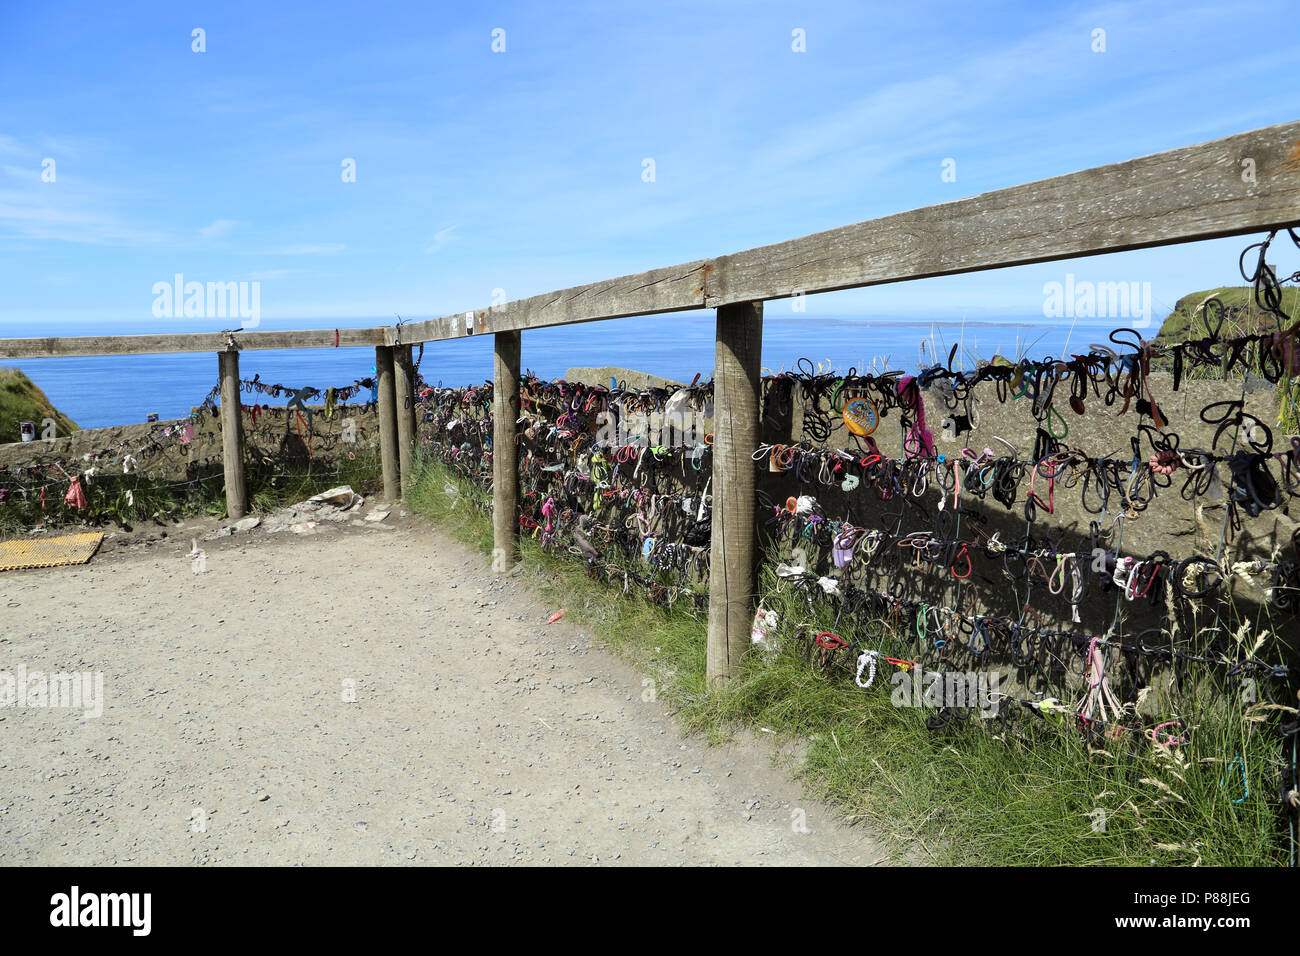 Hair ties adorn a fence along the Cliffs of Moher.The Cliffs of Moher are soaring sea cliffs located at the southwestern edge of the Burren region in  Stock Photo